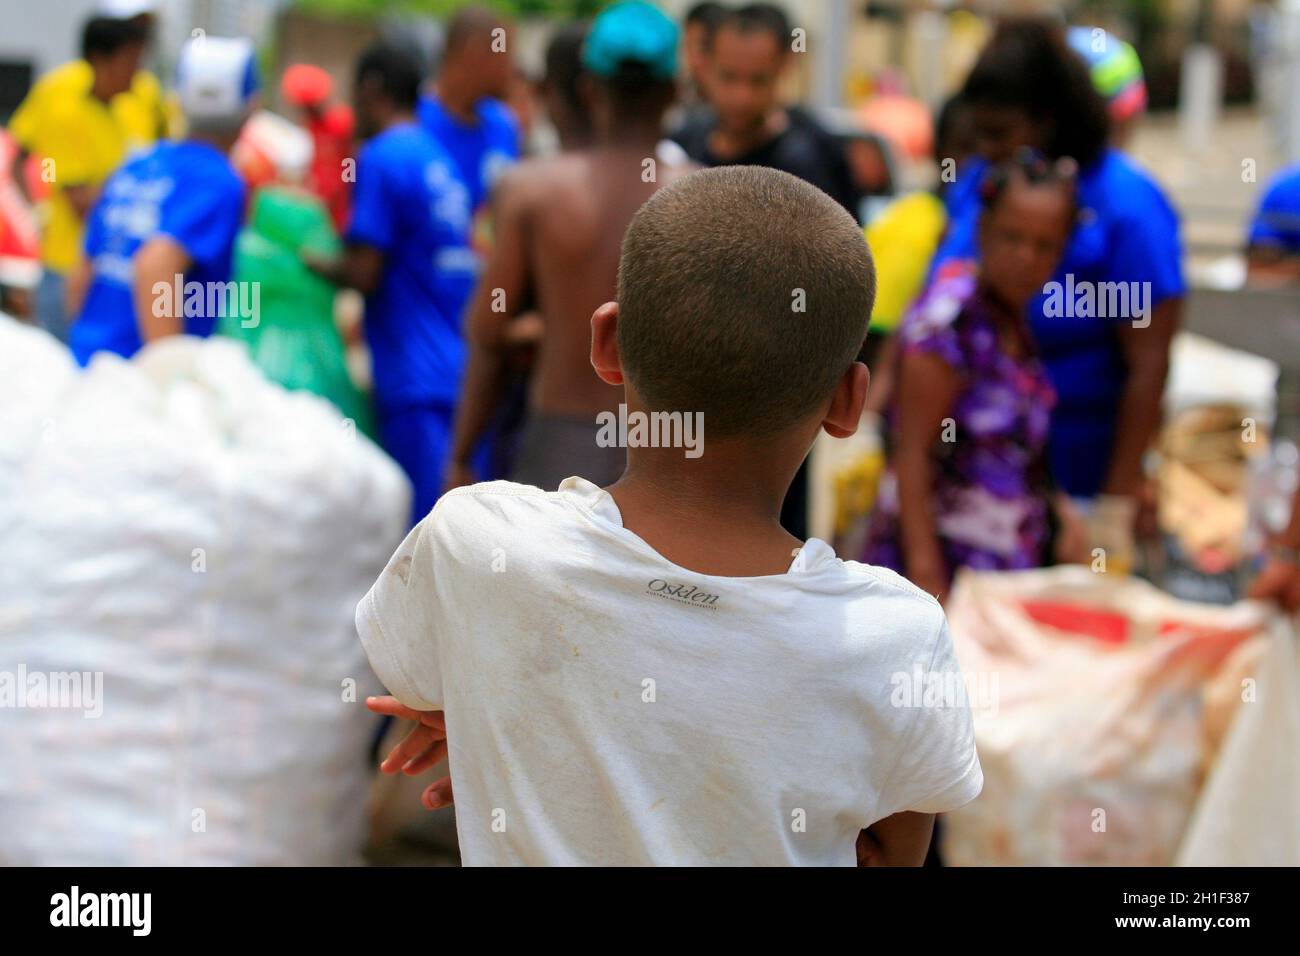 salvador, bahia / brazil - march 2, 2014: 11 year old boy is seen at the Recycling Center in Barra neighborhood in Salvador. characterizing child labo Stock Photo